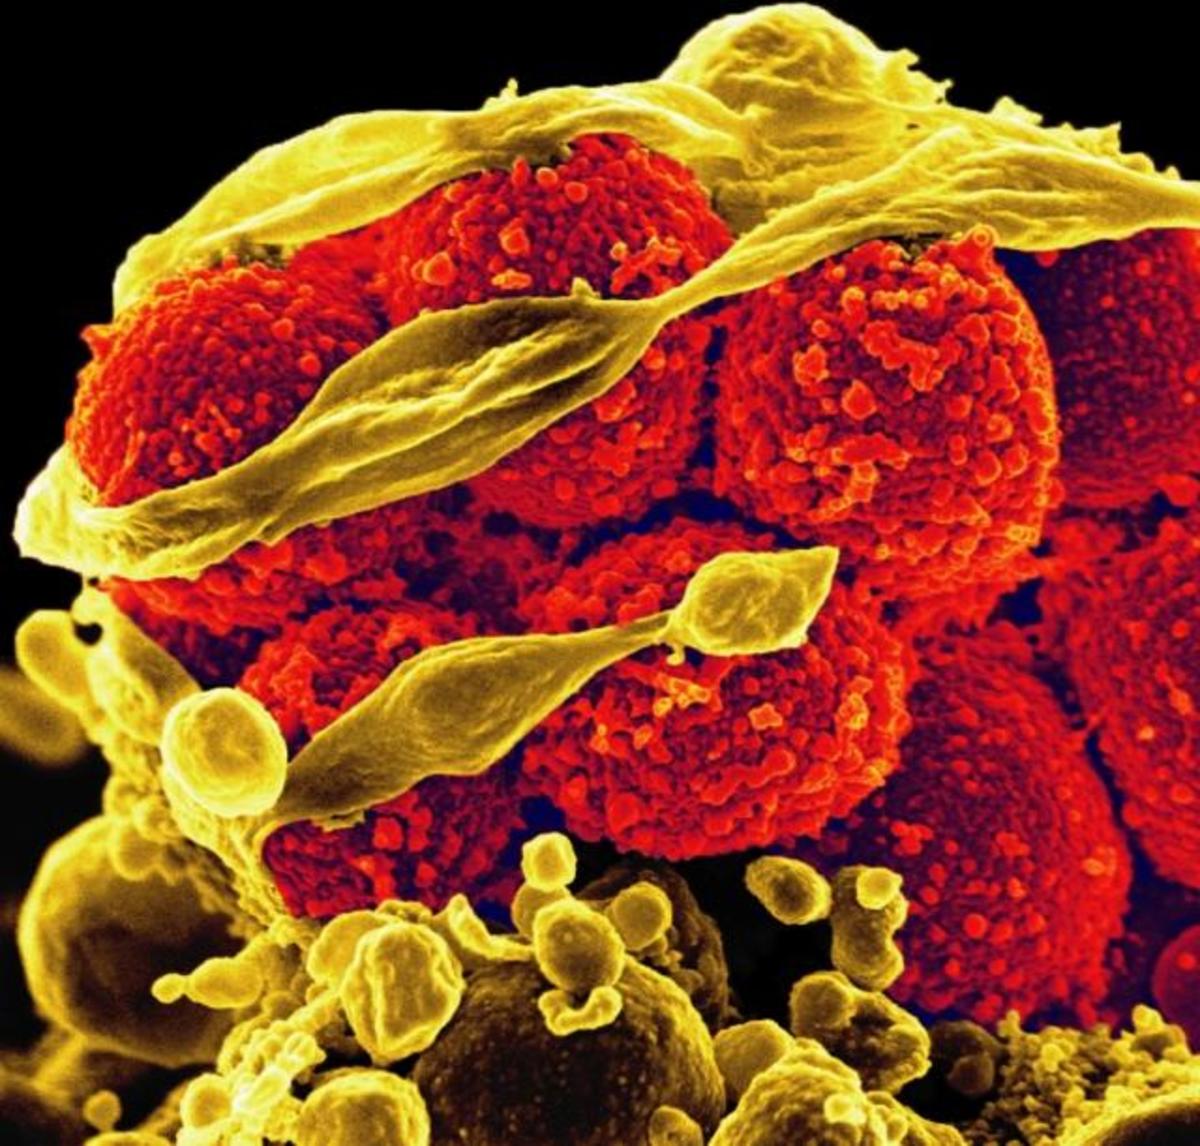 Scanning electron micrograph of methicillin-resistant Staphylococcus aureus bacteria (yellow, round items) killing and escaping from a human white cell. Credit: NIAID